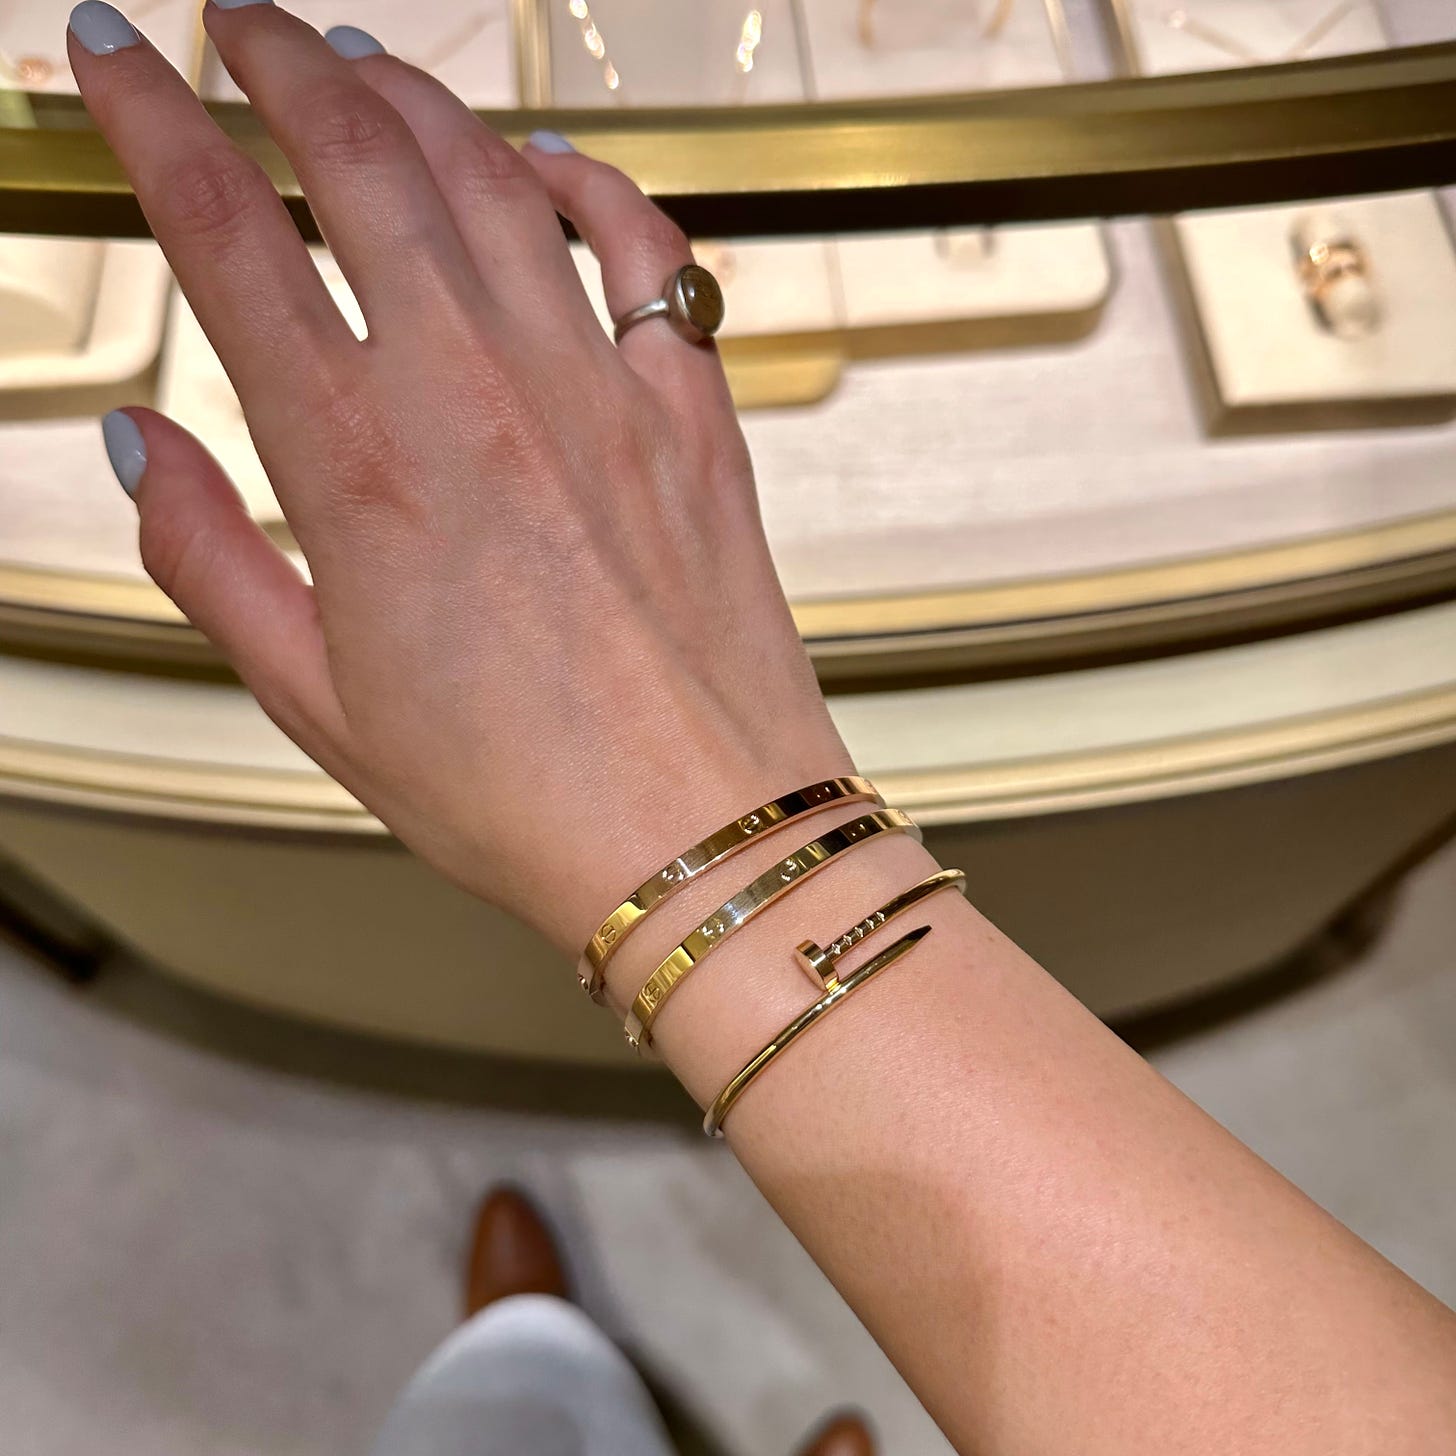 Cartier Love bracelet. Your partner puts it on and locks it. They